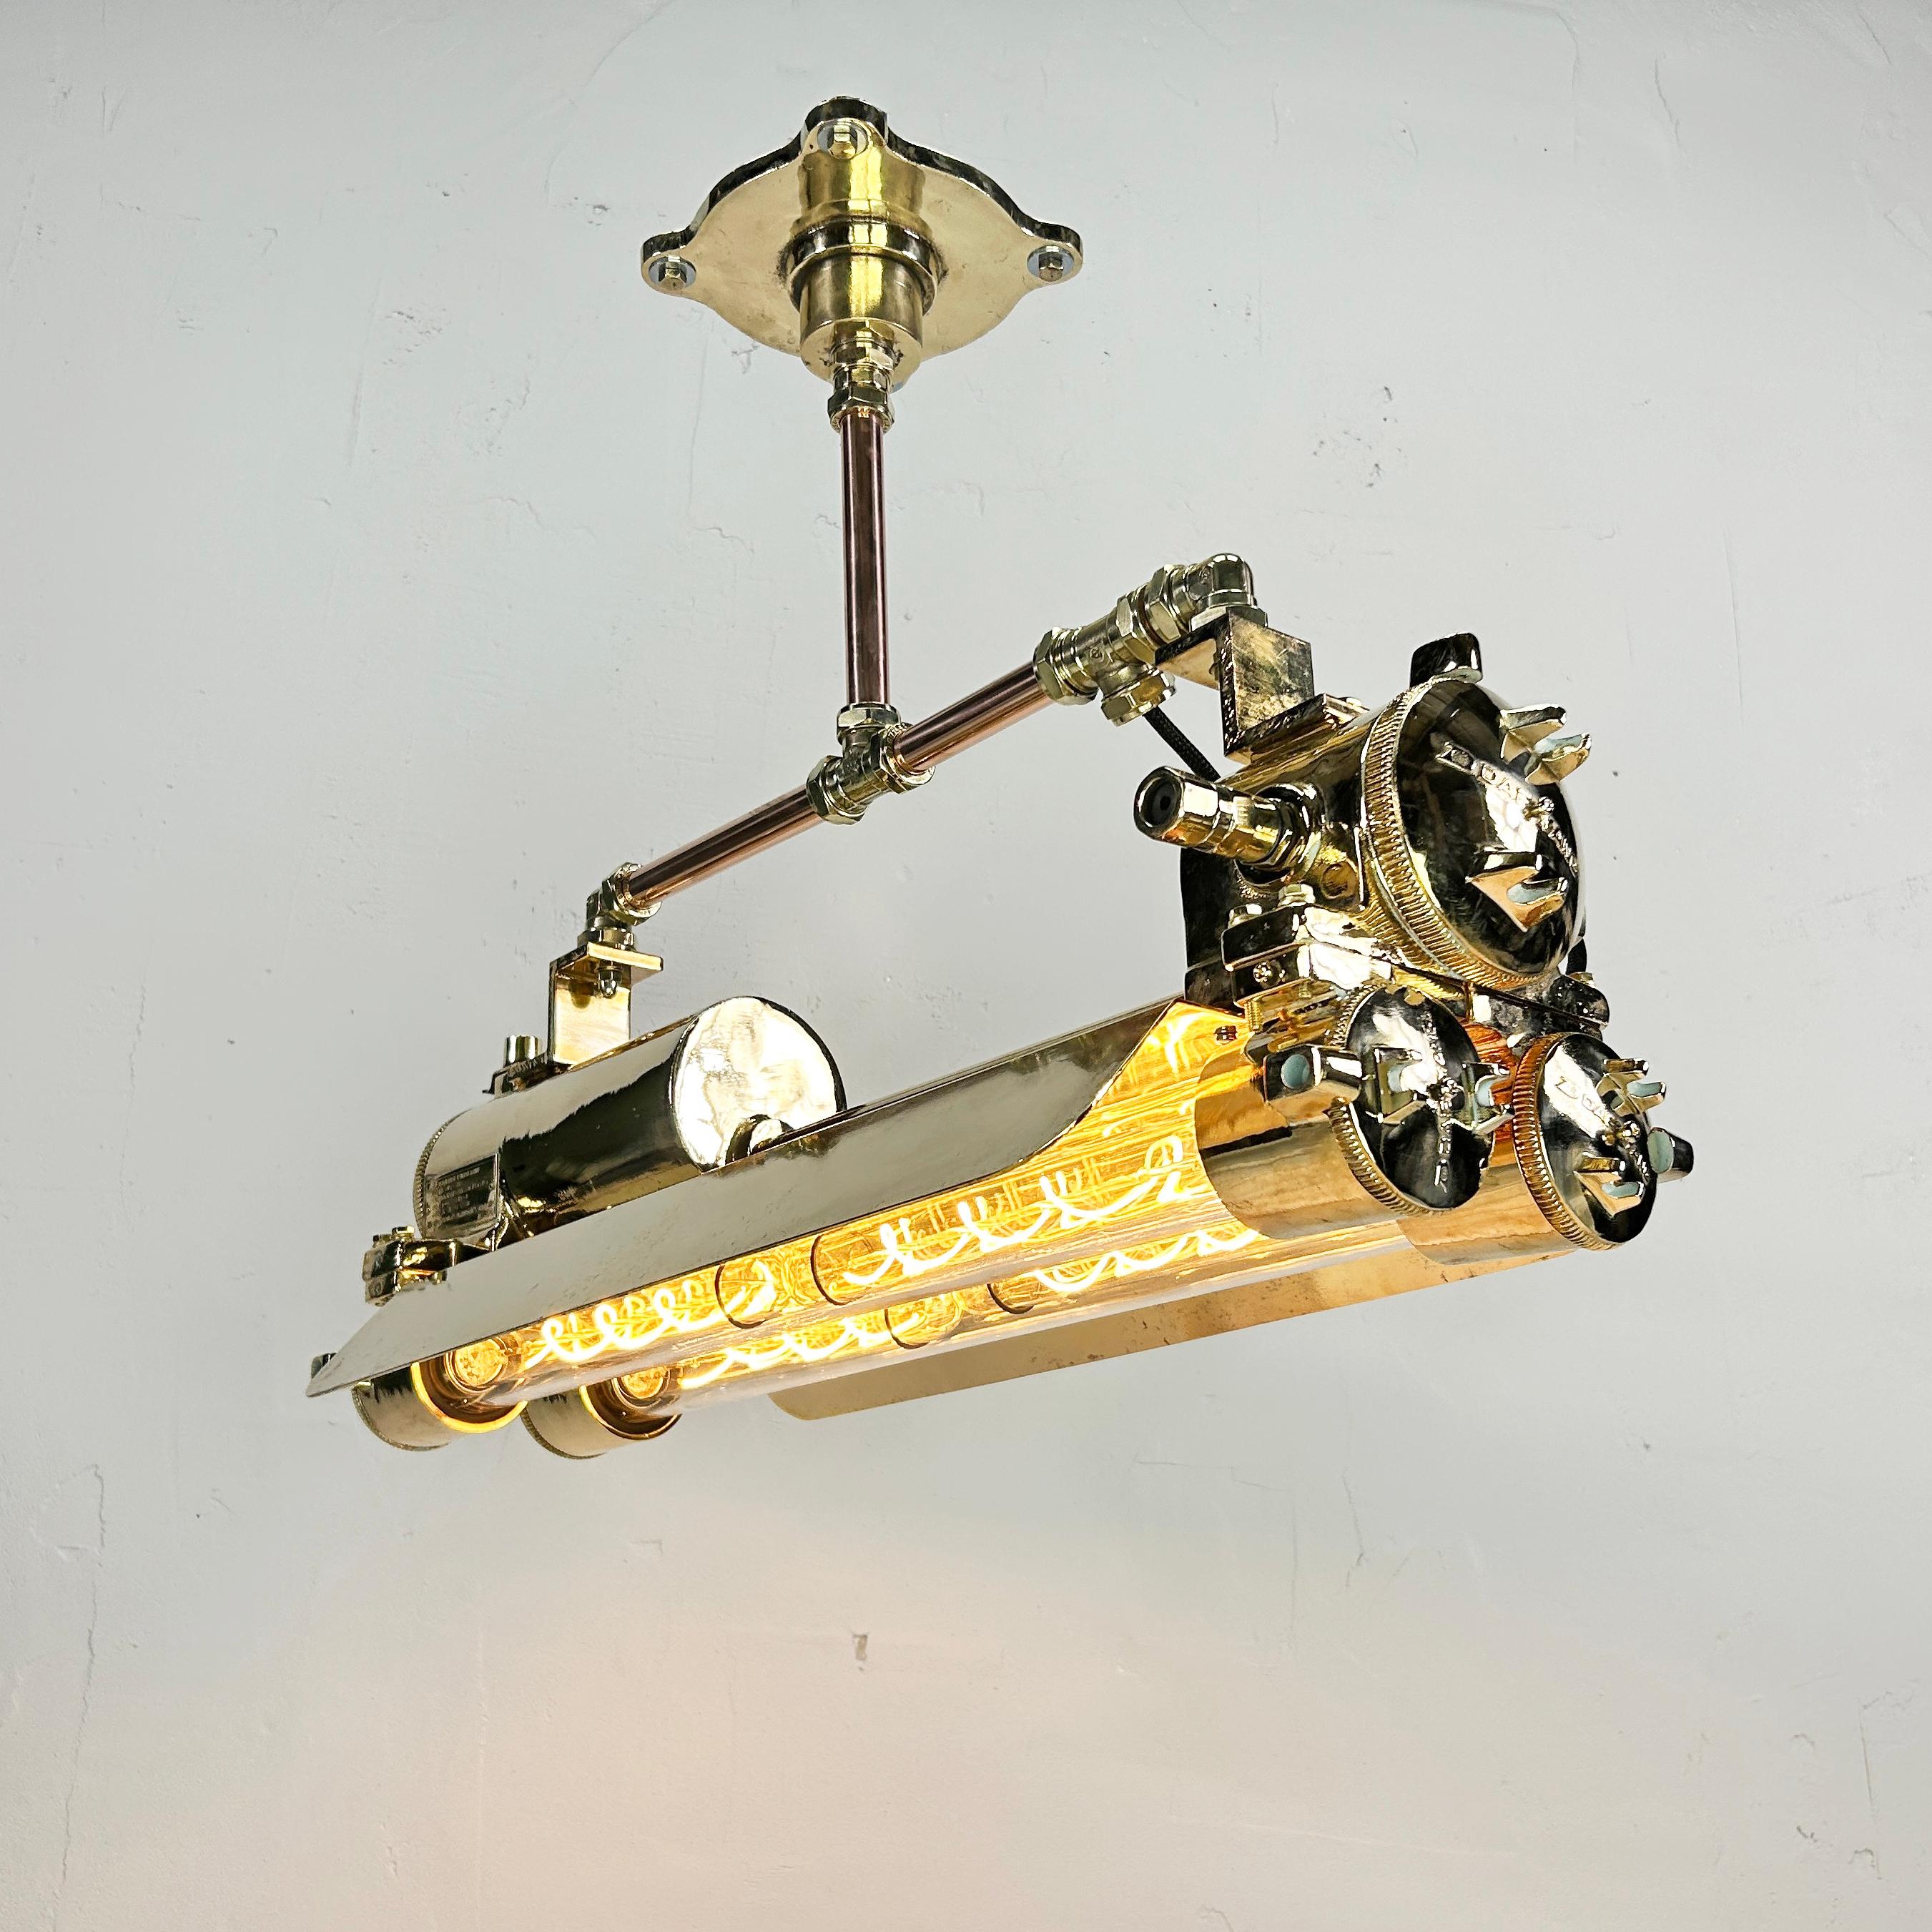 The brass industrial strip light is a vintage flameproof ceiling light manufactured c1970 by South Korean company Daeyang. Originally this nautical ceiling light was found in the engine rooms of decommissioned ships. Salvaged and professionally